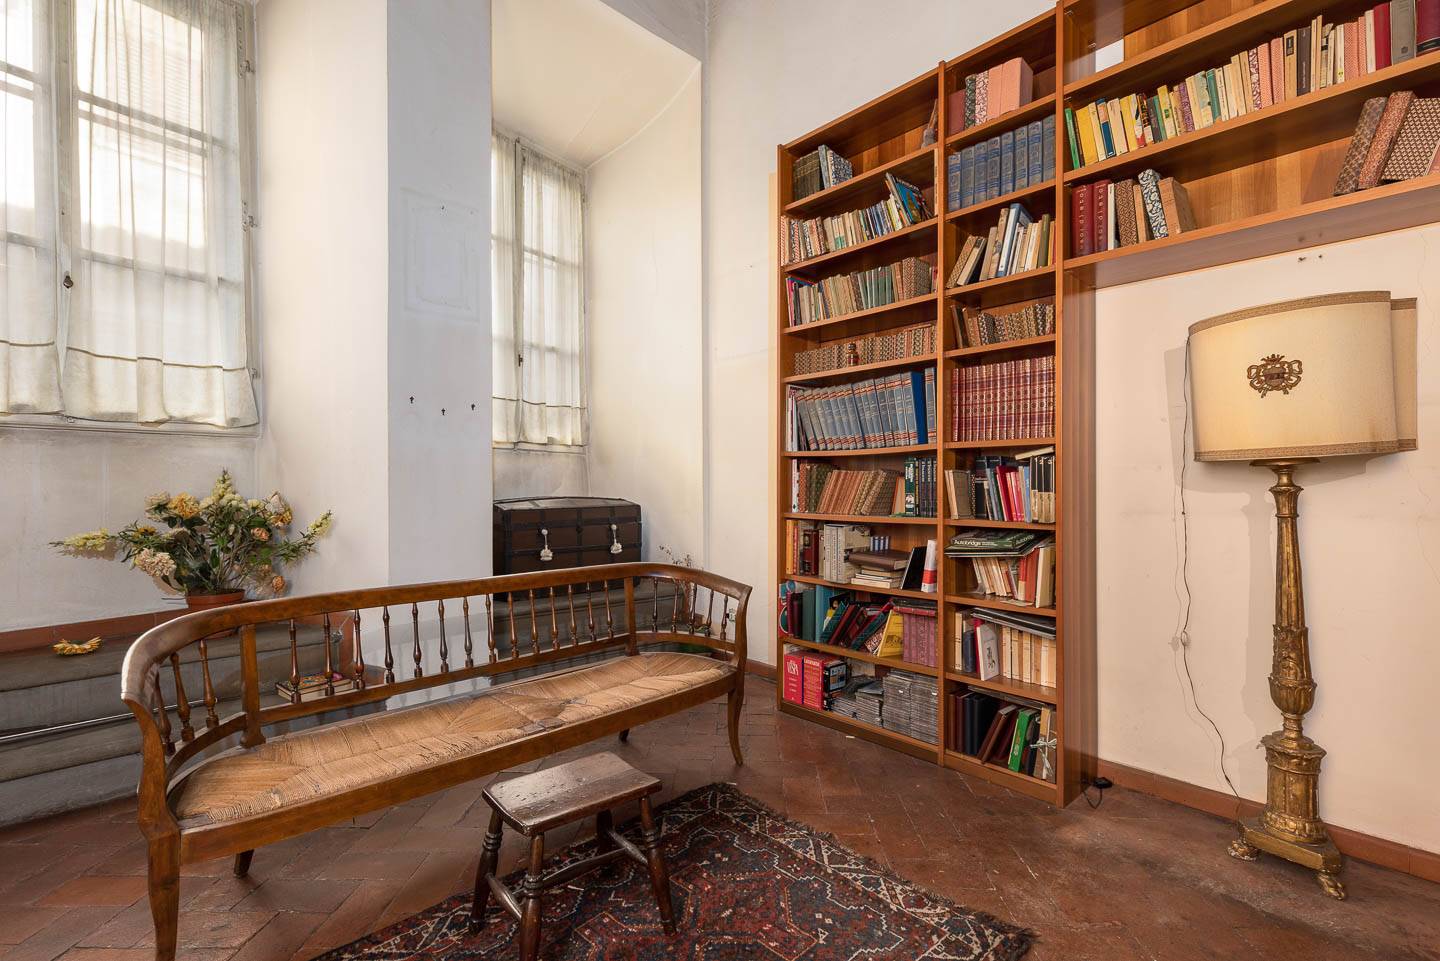 OLTRARNO, FIRENZE, Apartment for sale of 230 Sq. mt., Be restored, Heating Individual heating system, Energetic class: G, Epi: 175 kwh/m2 year, 